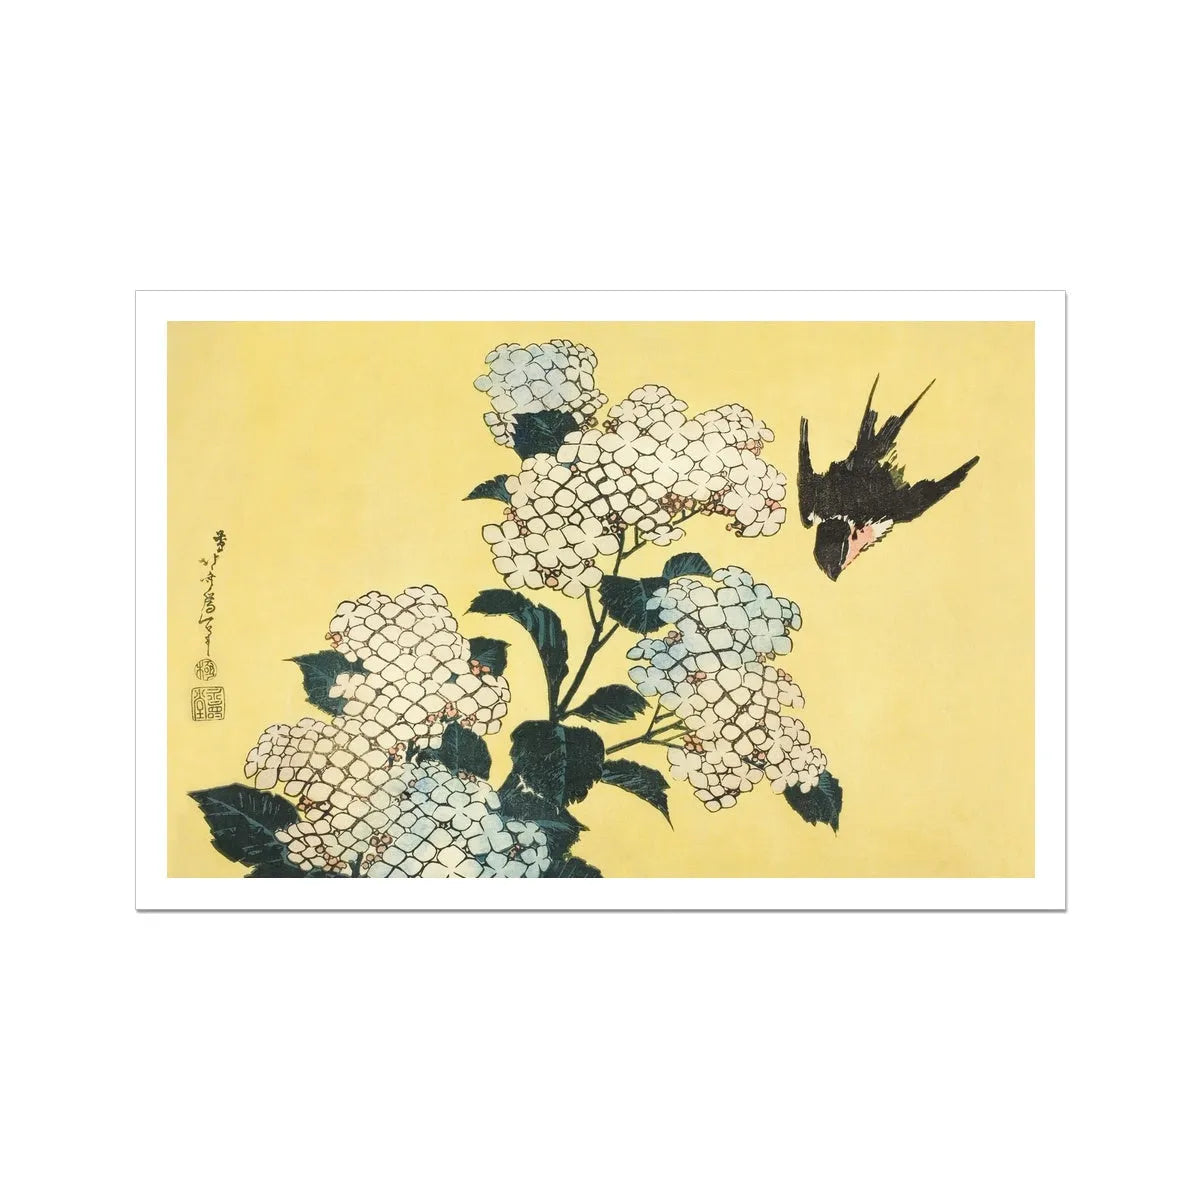 Hydrangea And Swallow By Hokusai Fine Art Print - 30’x20’ - Posters Prints & Visual Artwork - Aesthetic Art